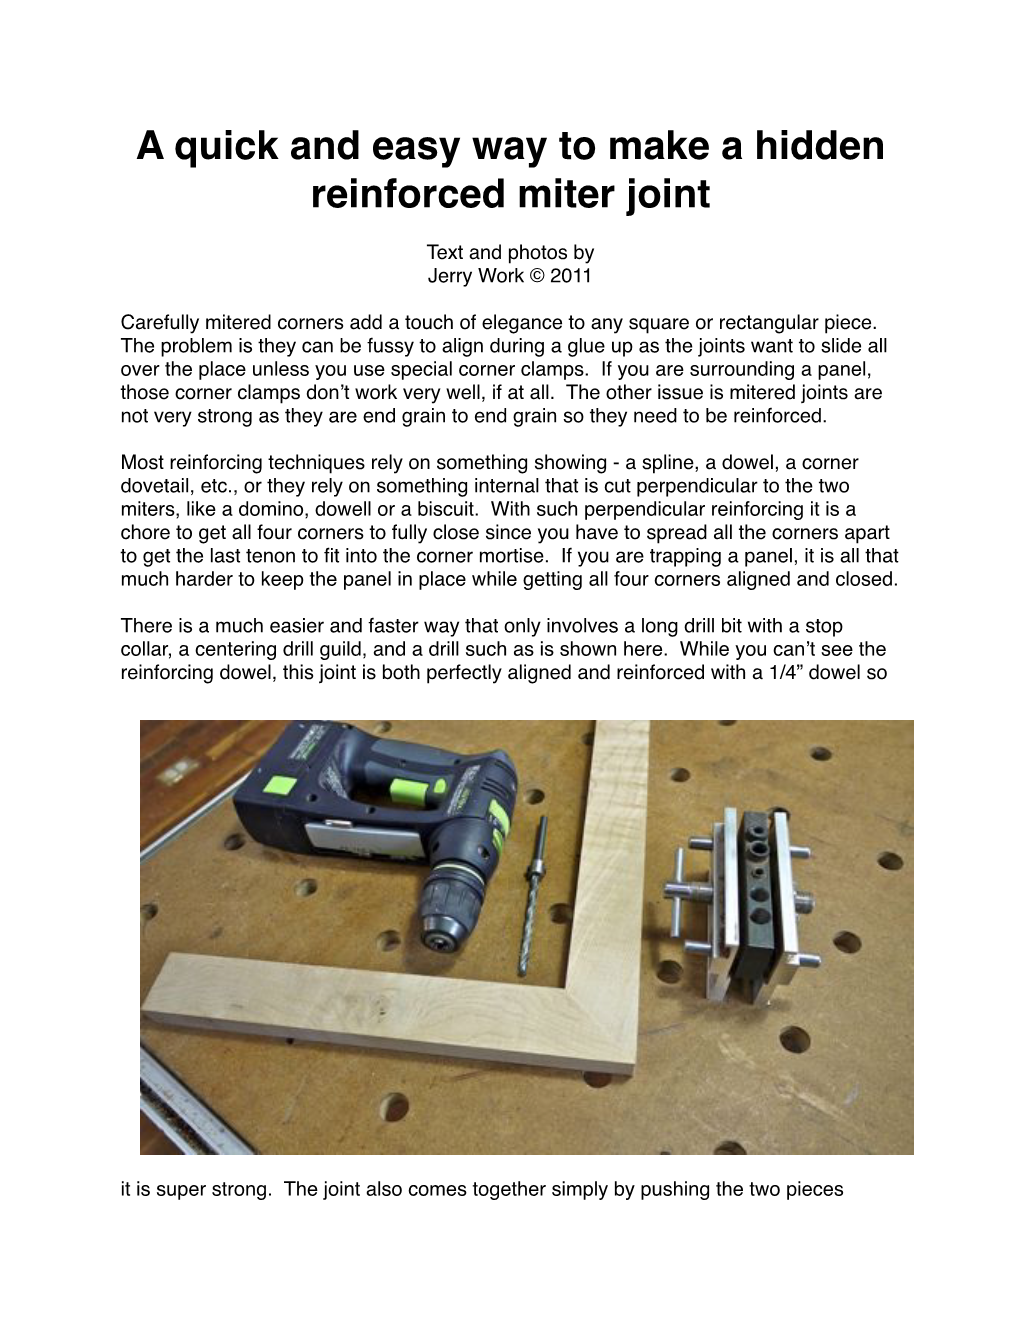 Hidden Reinforced Miter Joint-With Domino XL